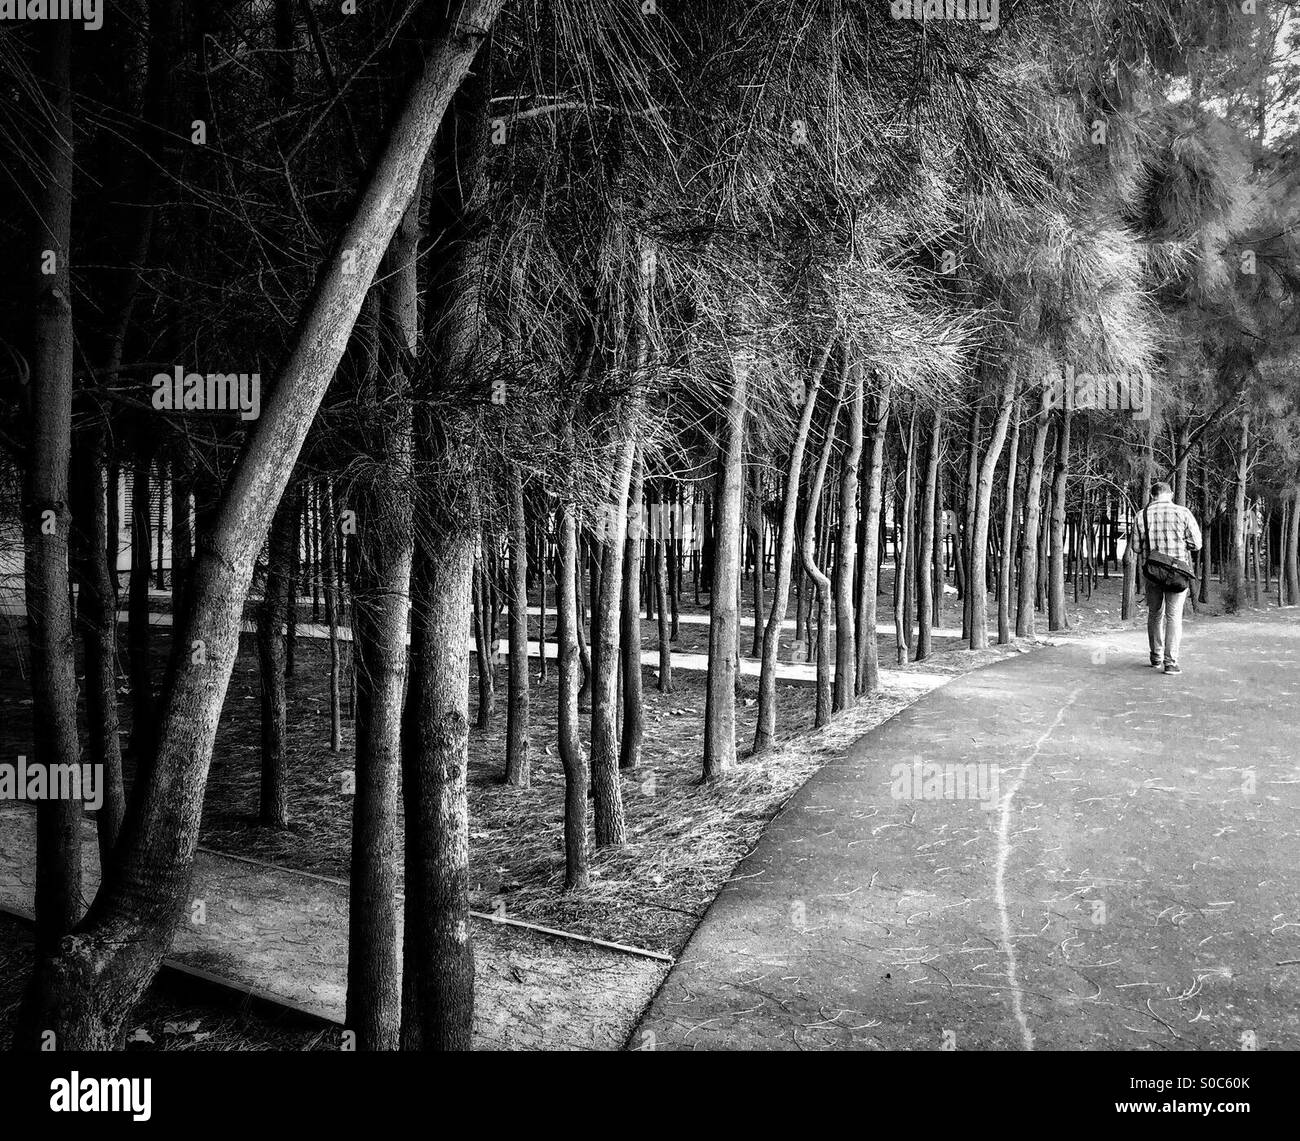 Man walking along curved path beside trees Stock Photo